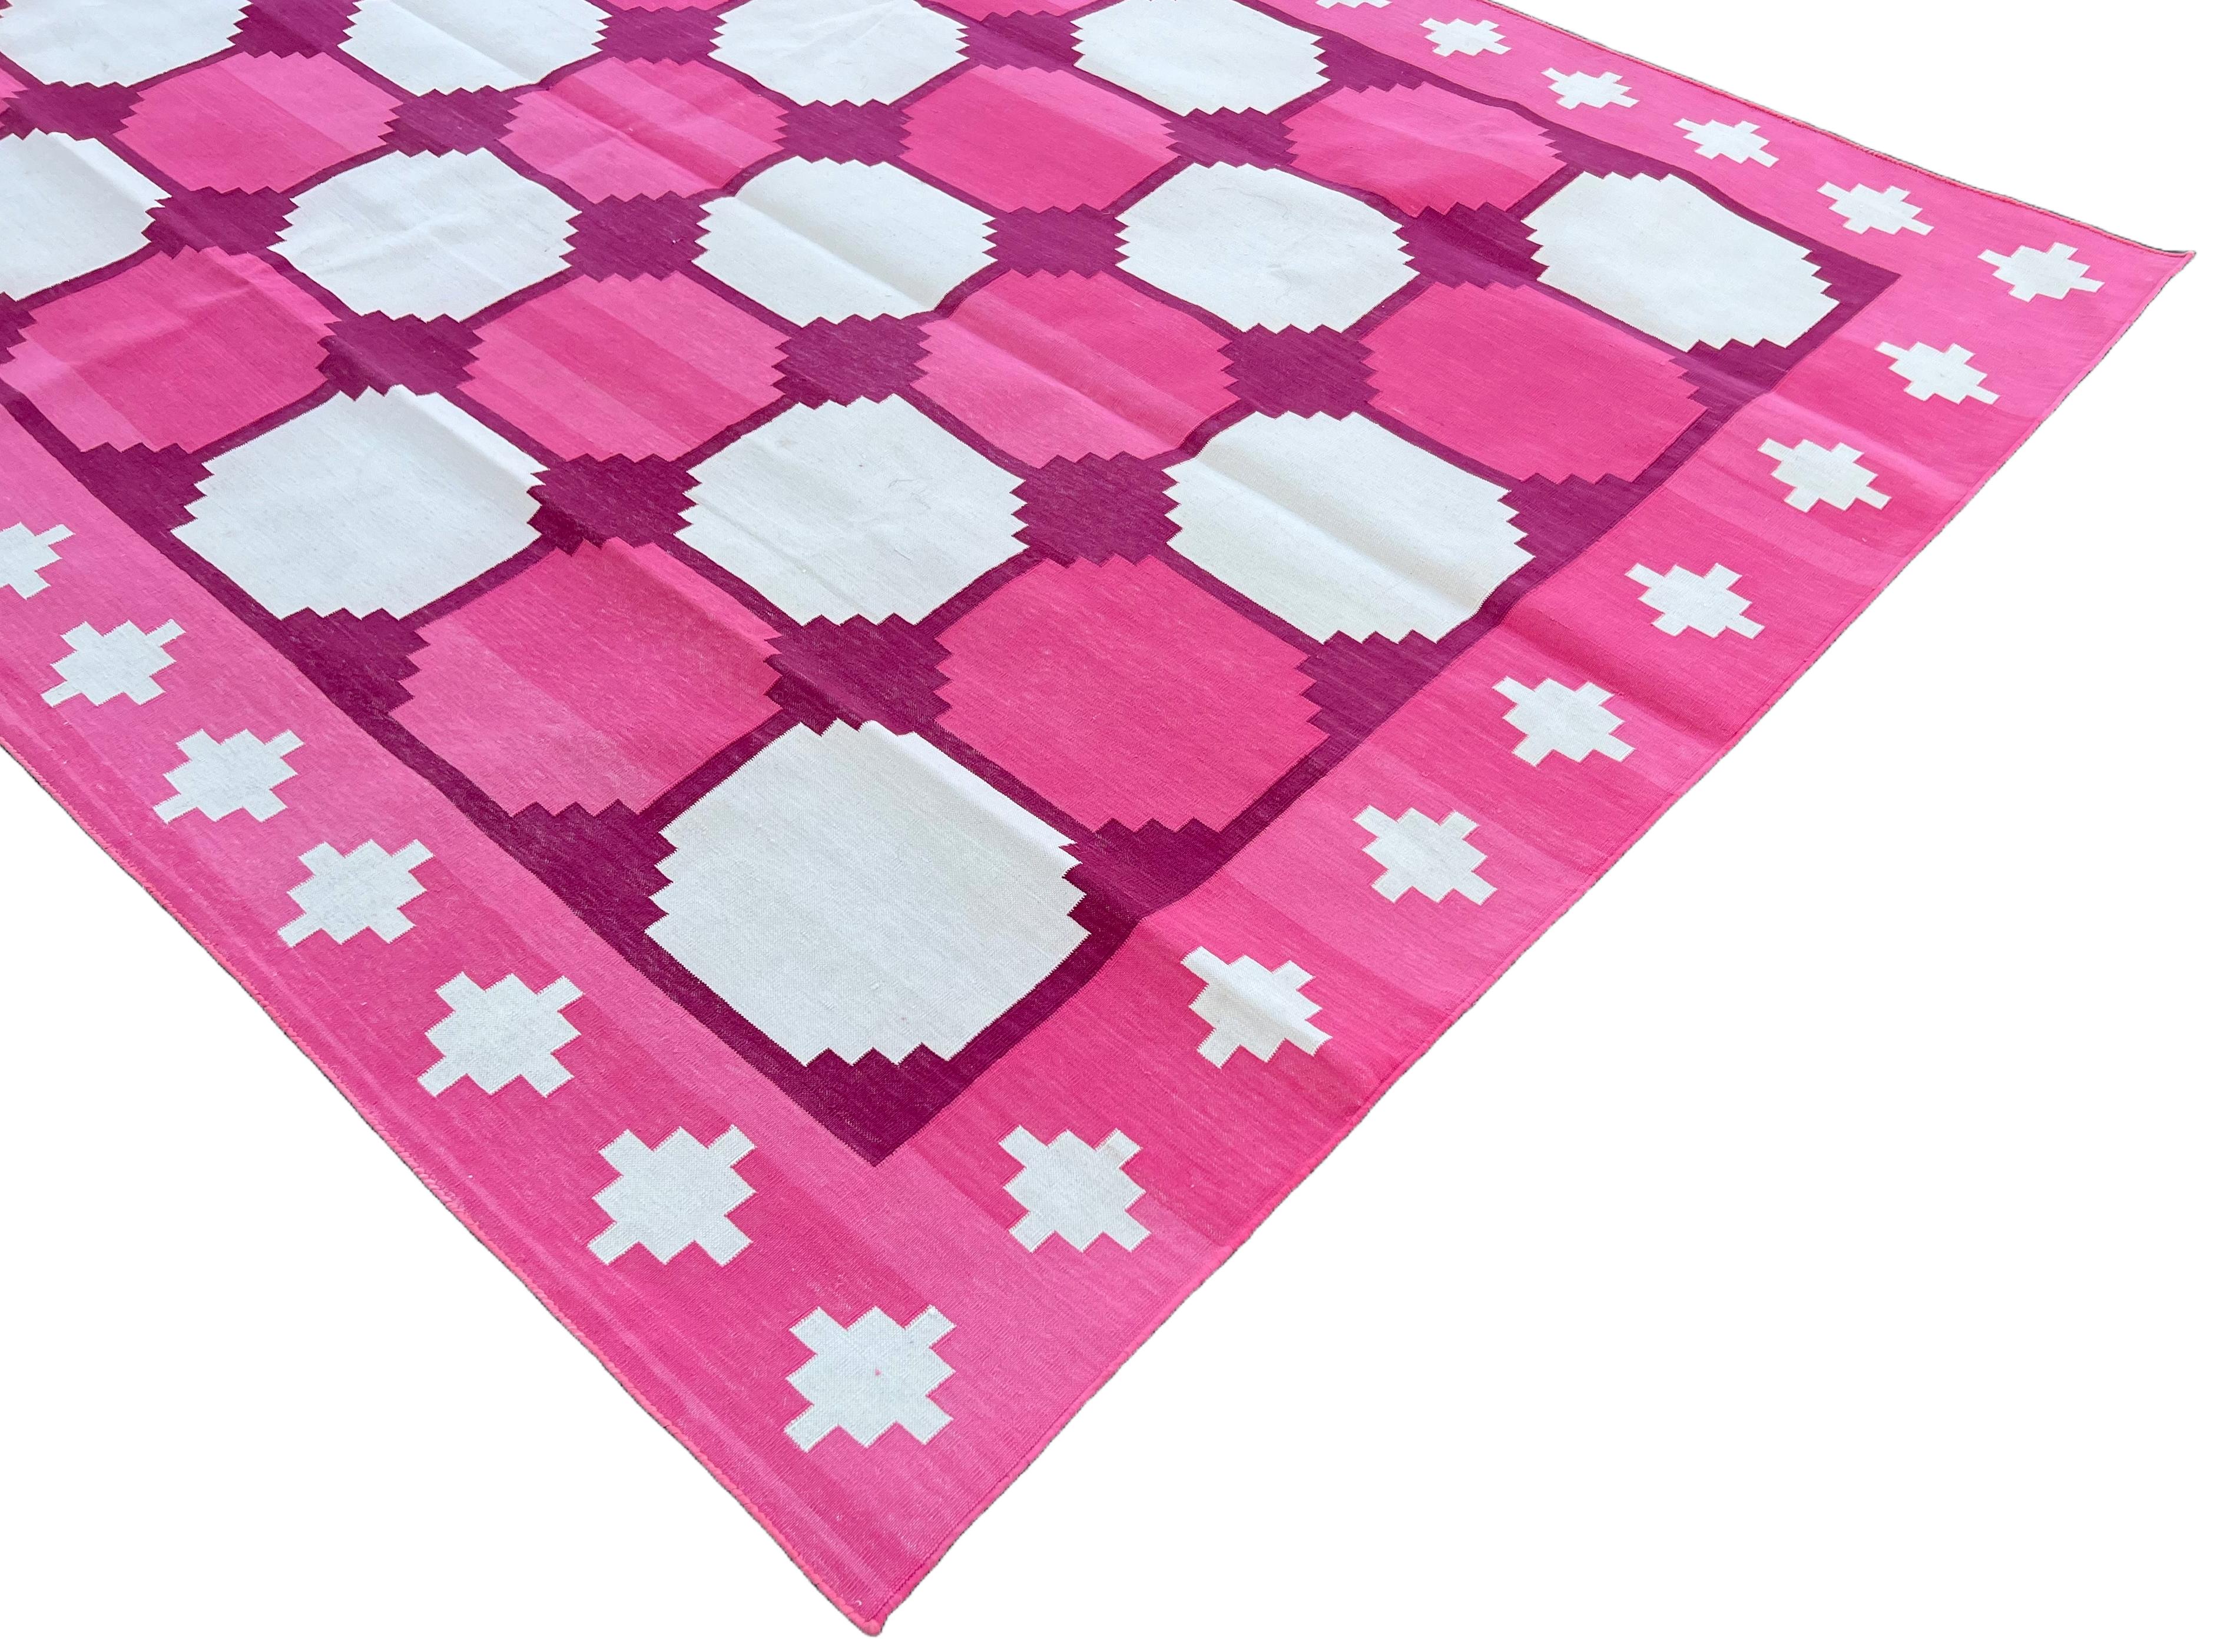 Contemporary Handmade Cotton Area Flat Weave Rug, Pink & White Indian Star Geometric Dhurrie For Sale